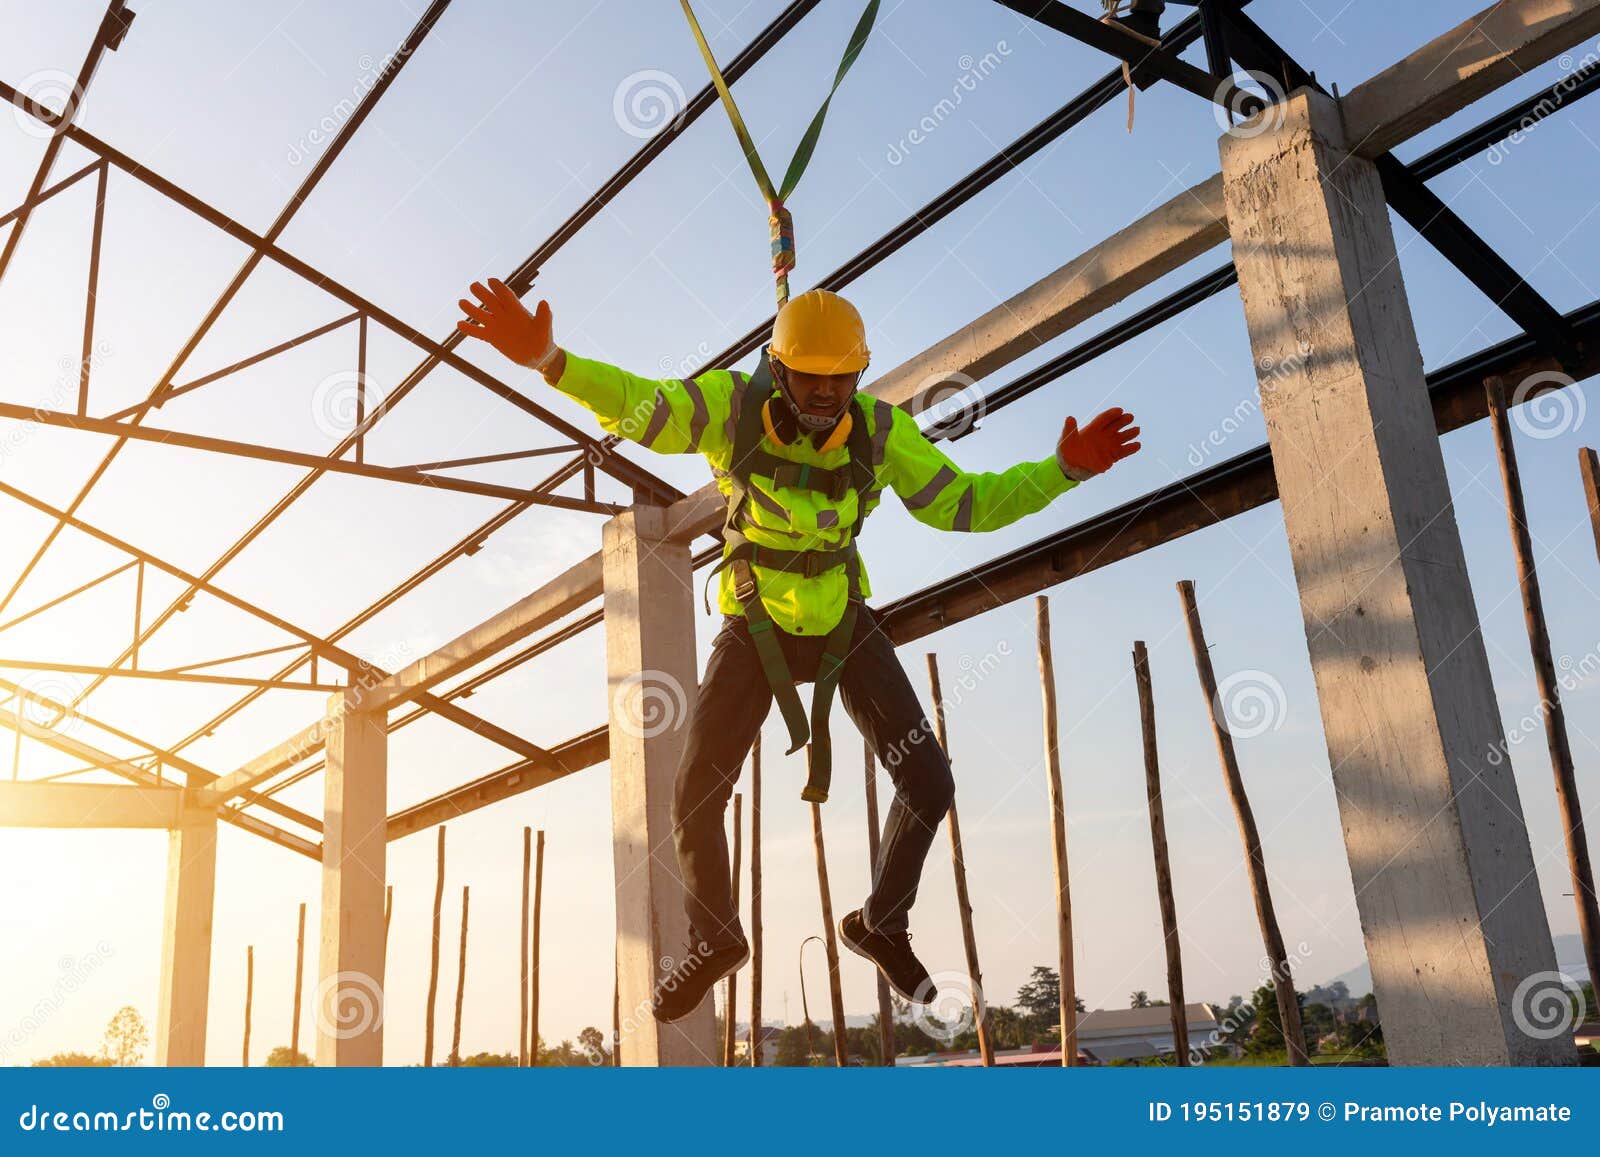 construction workers fall from a height but have safety to help. concept of preventing danger from heights with safety on the